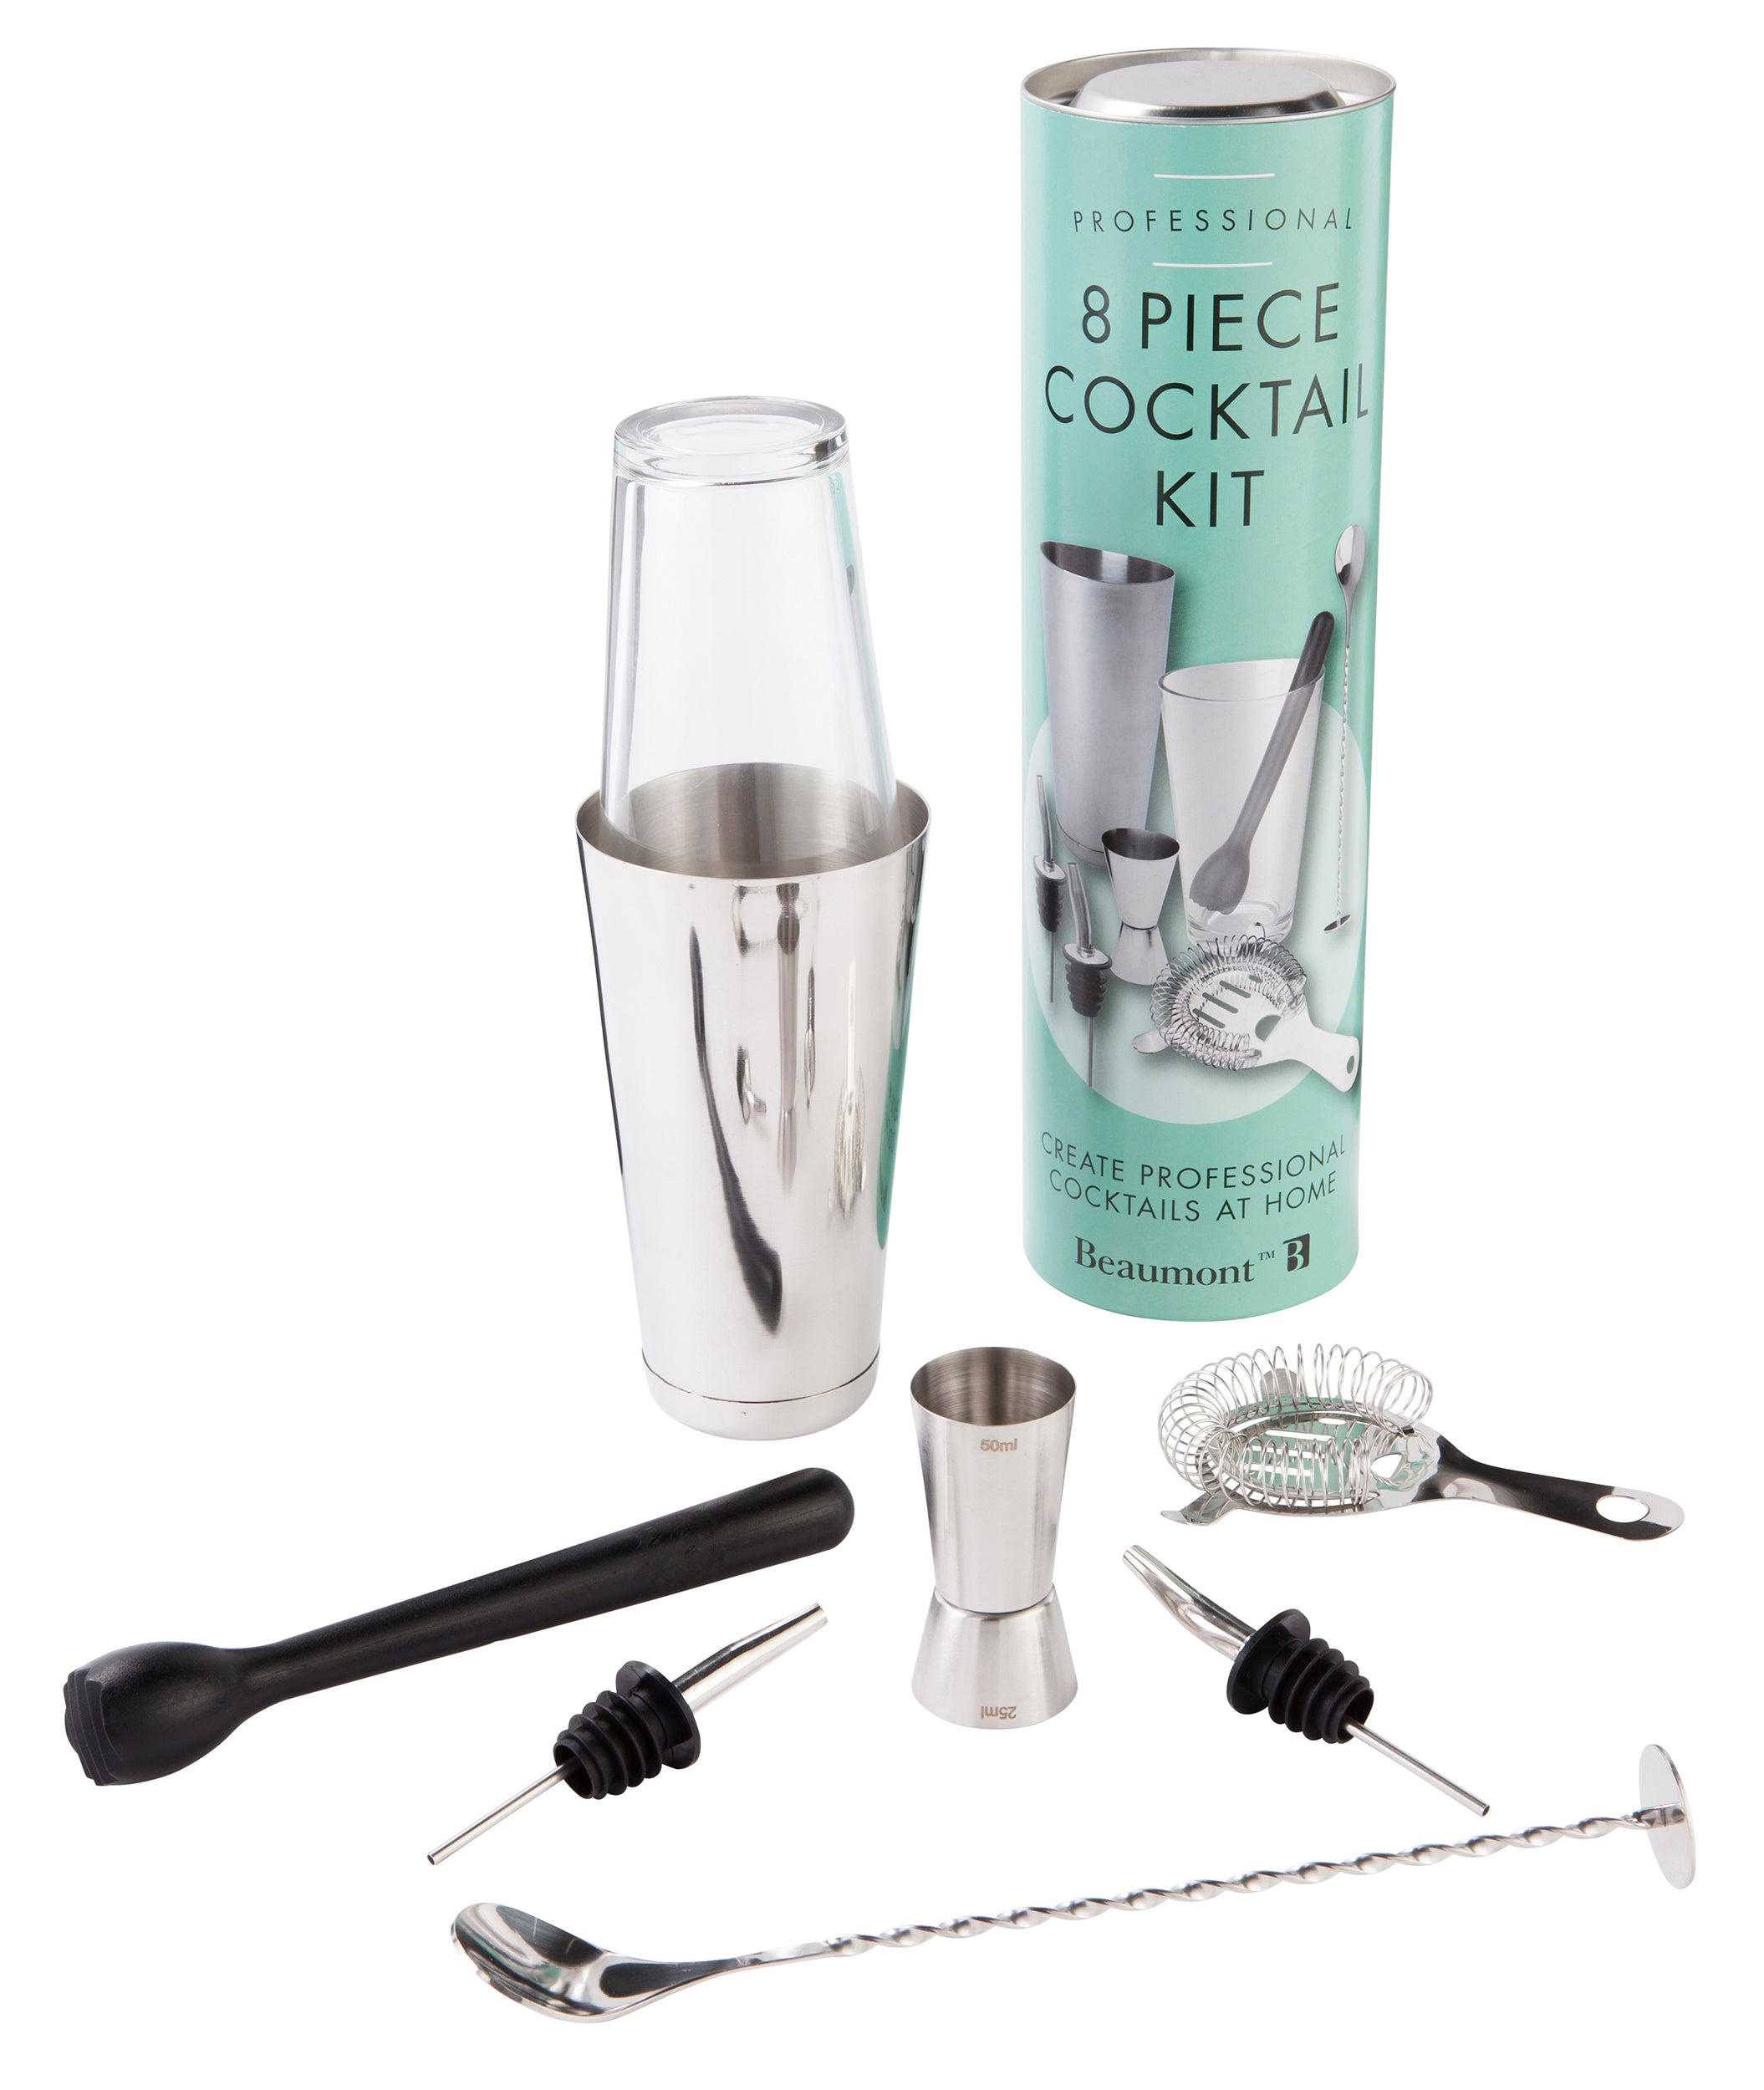 Cocktail Kit Professional 8 Piece Set - Buy Online at